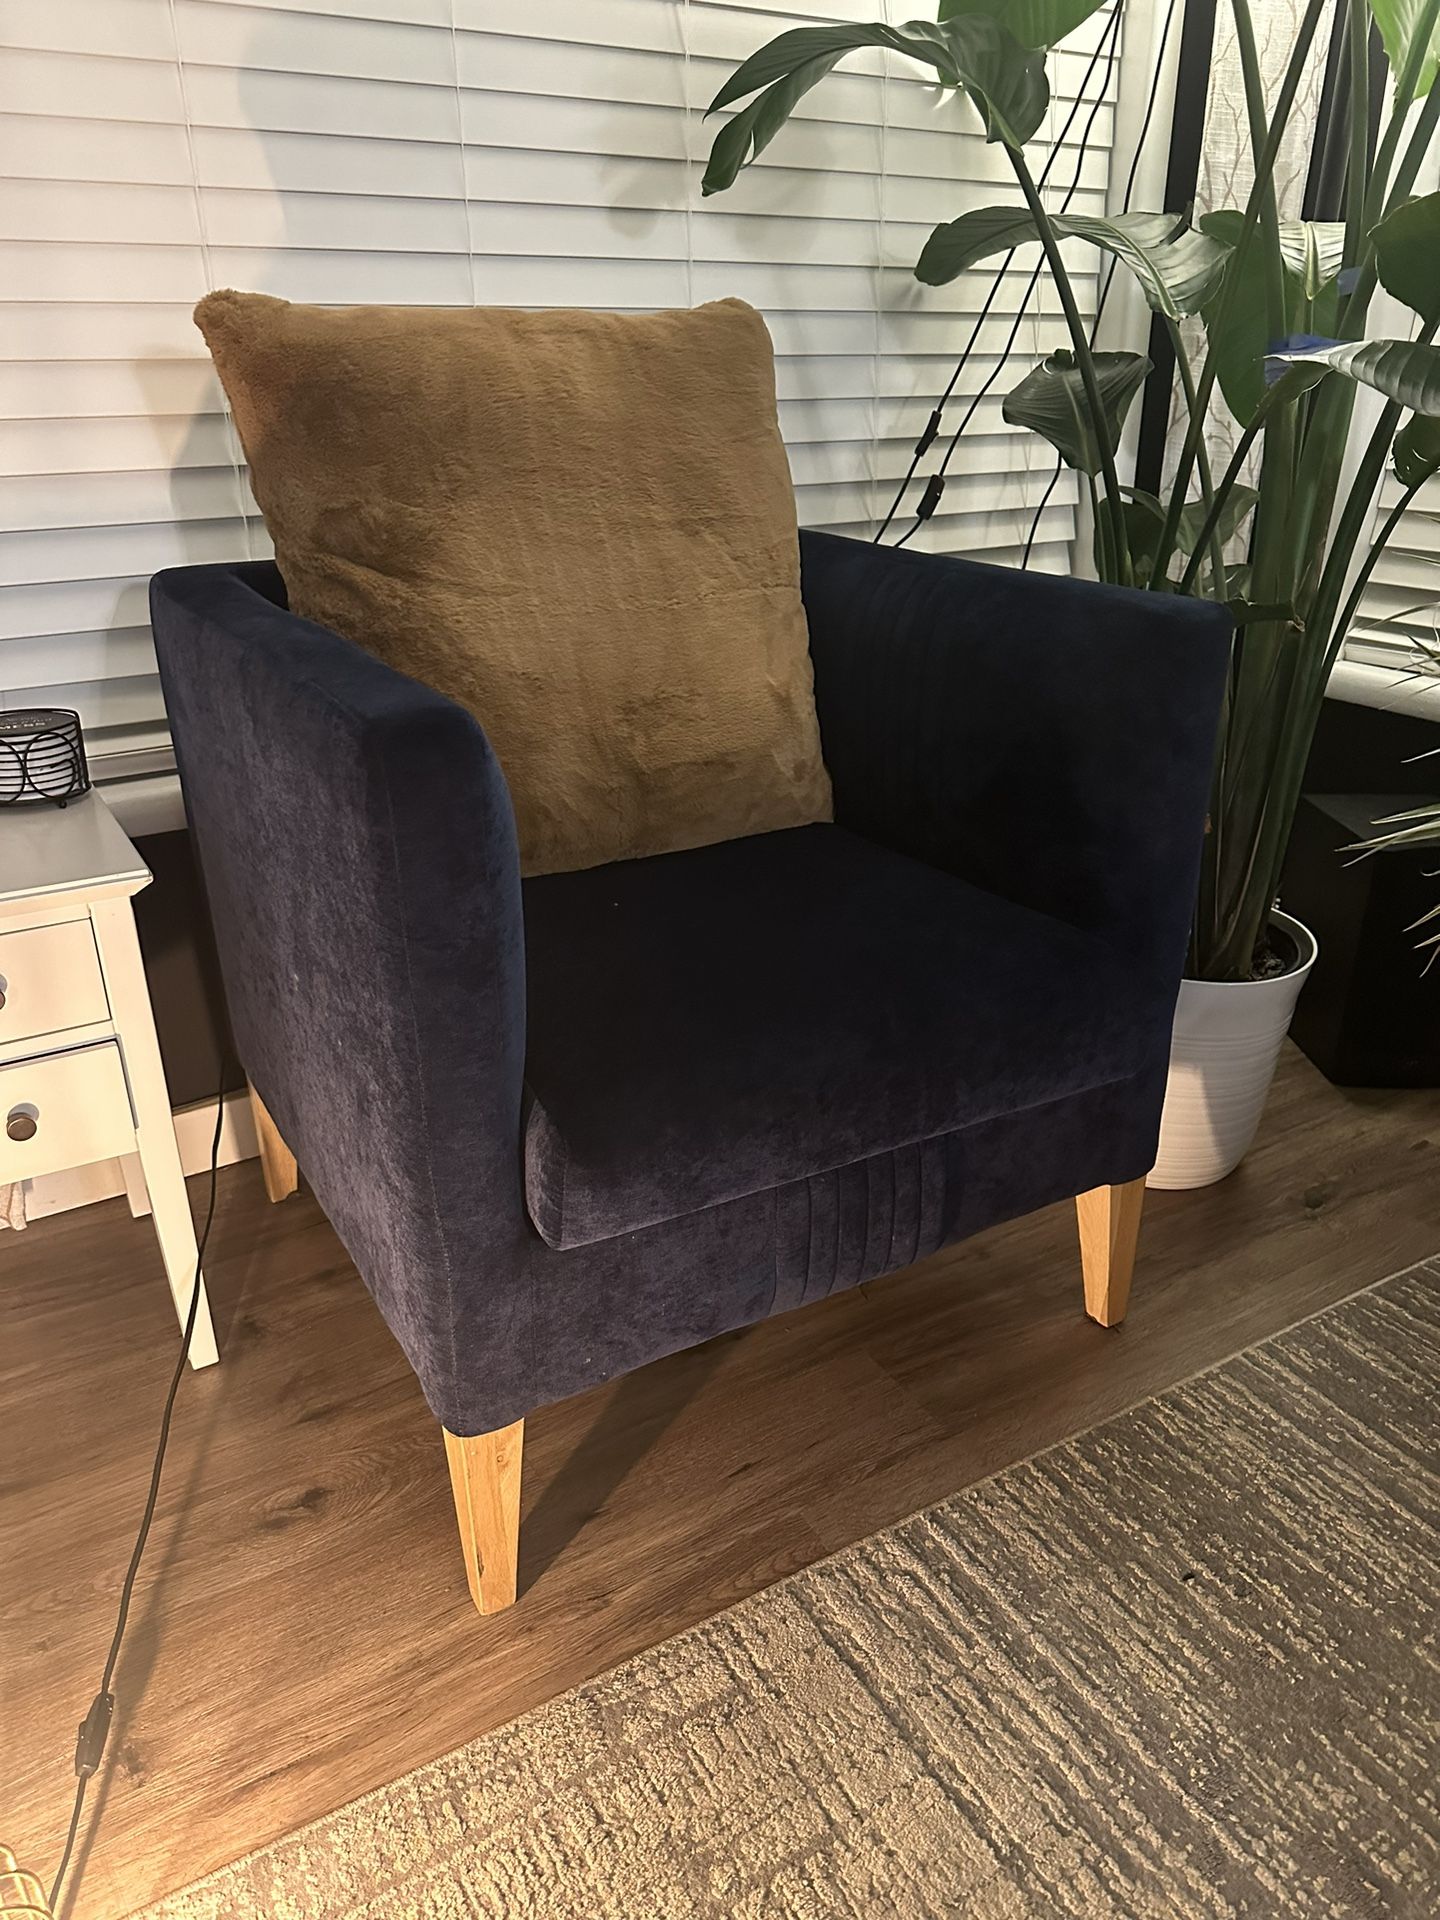 2 Blue Velvety Chairs W/ Pillow! Pair For $200